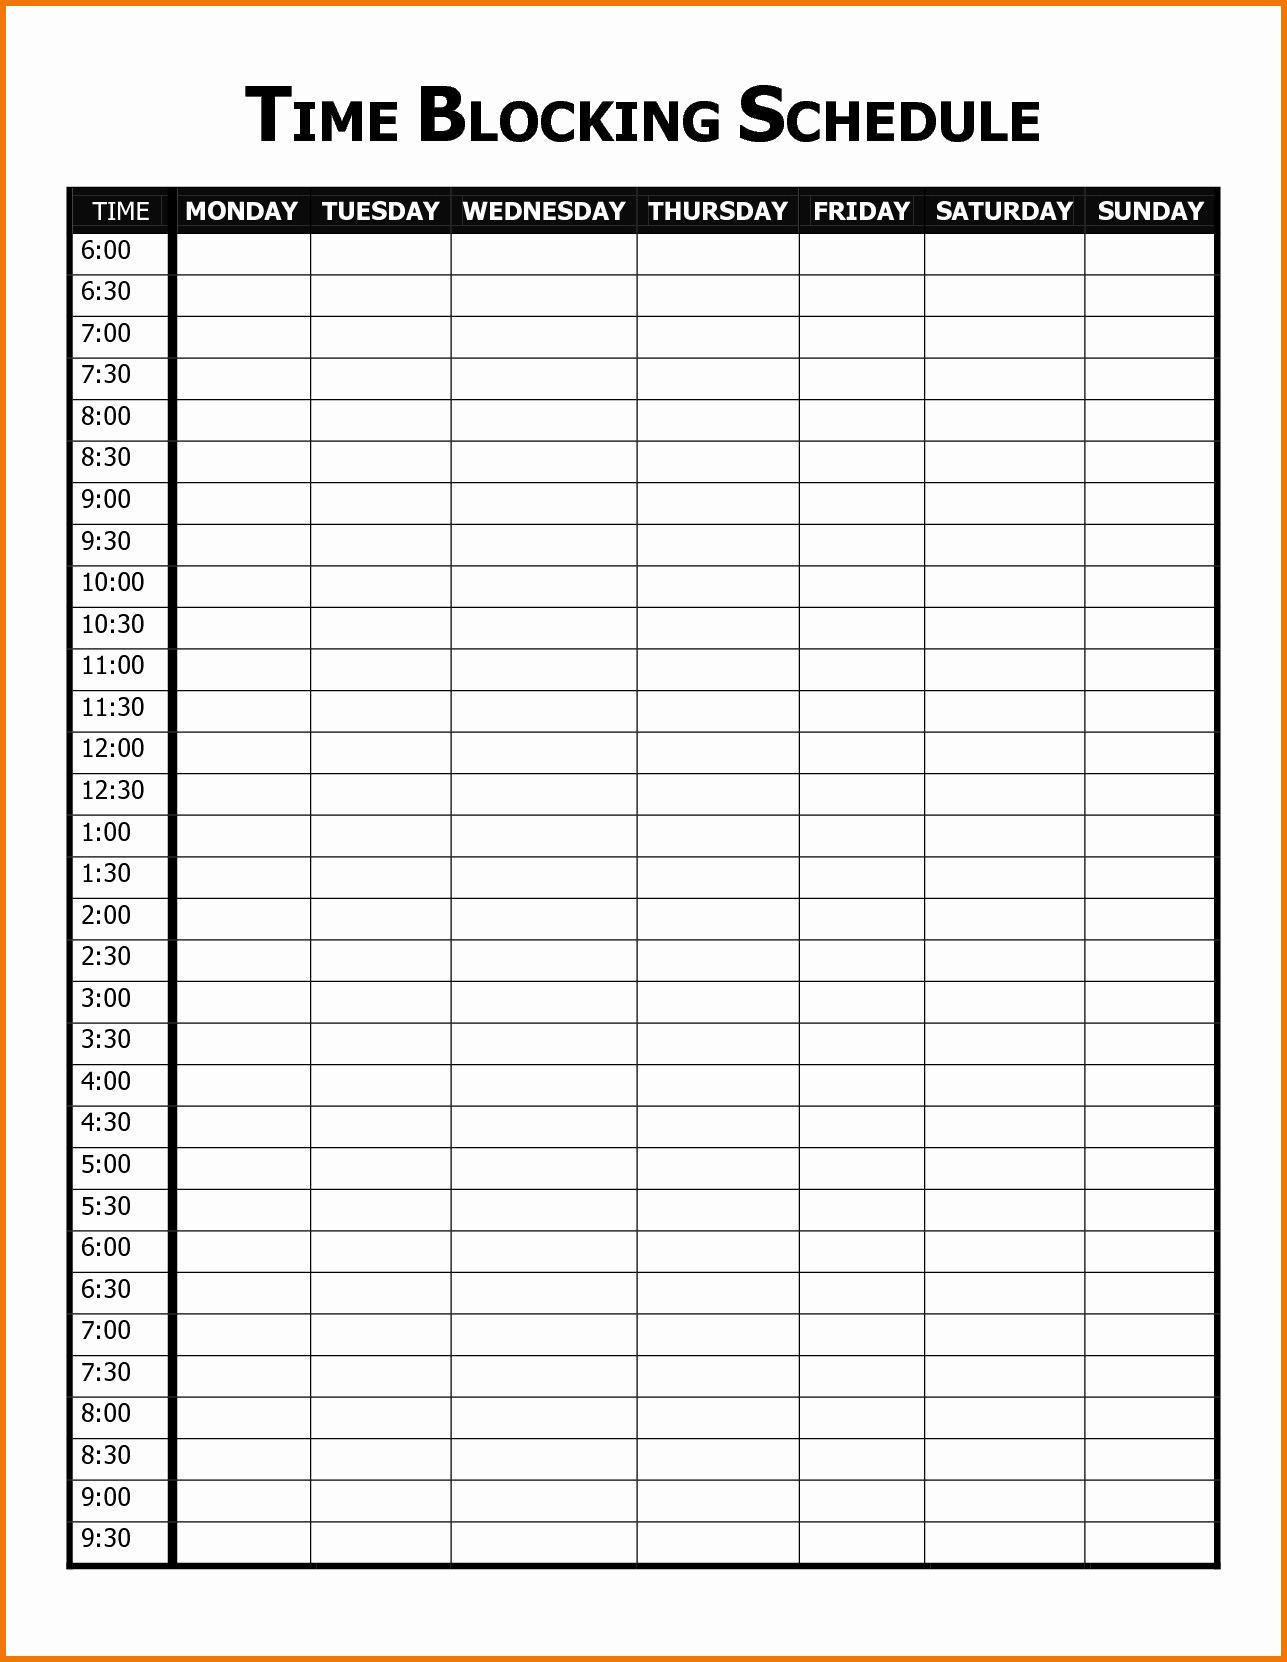 Parenting Time Calendar Template Best Of Blank Calendar Template with Notes Parenting Time 2018